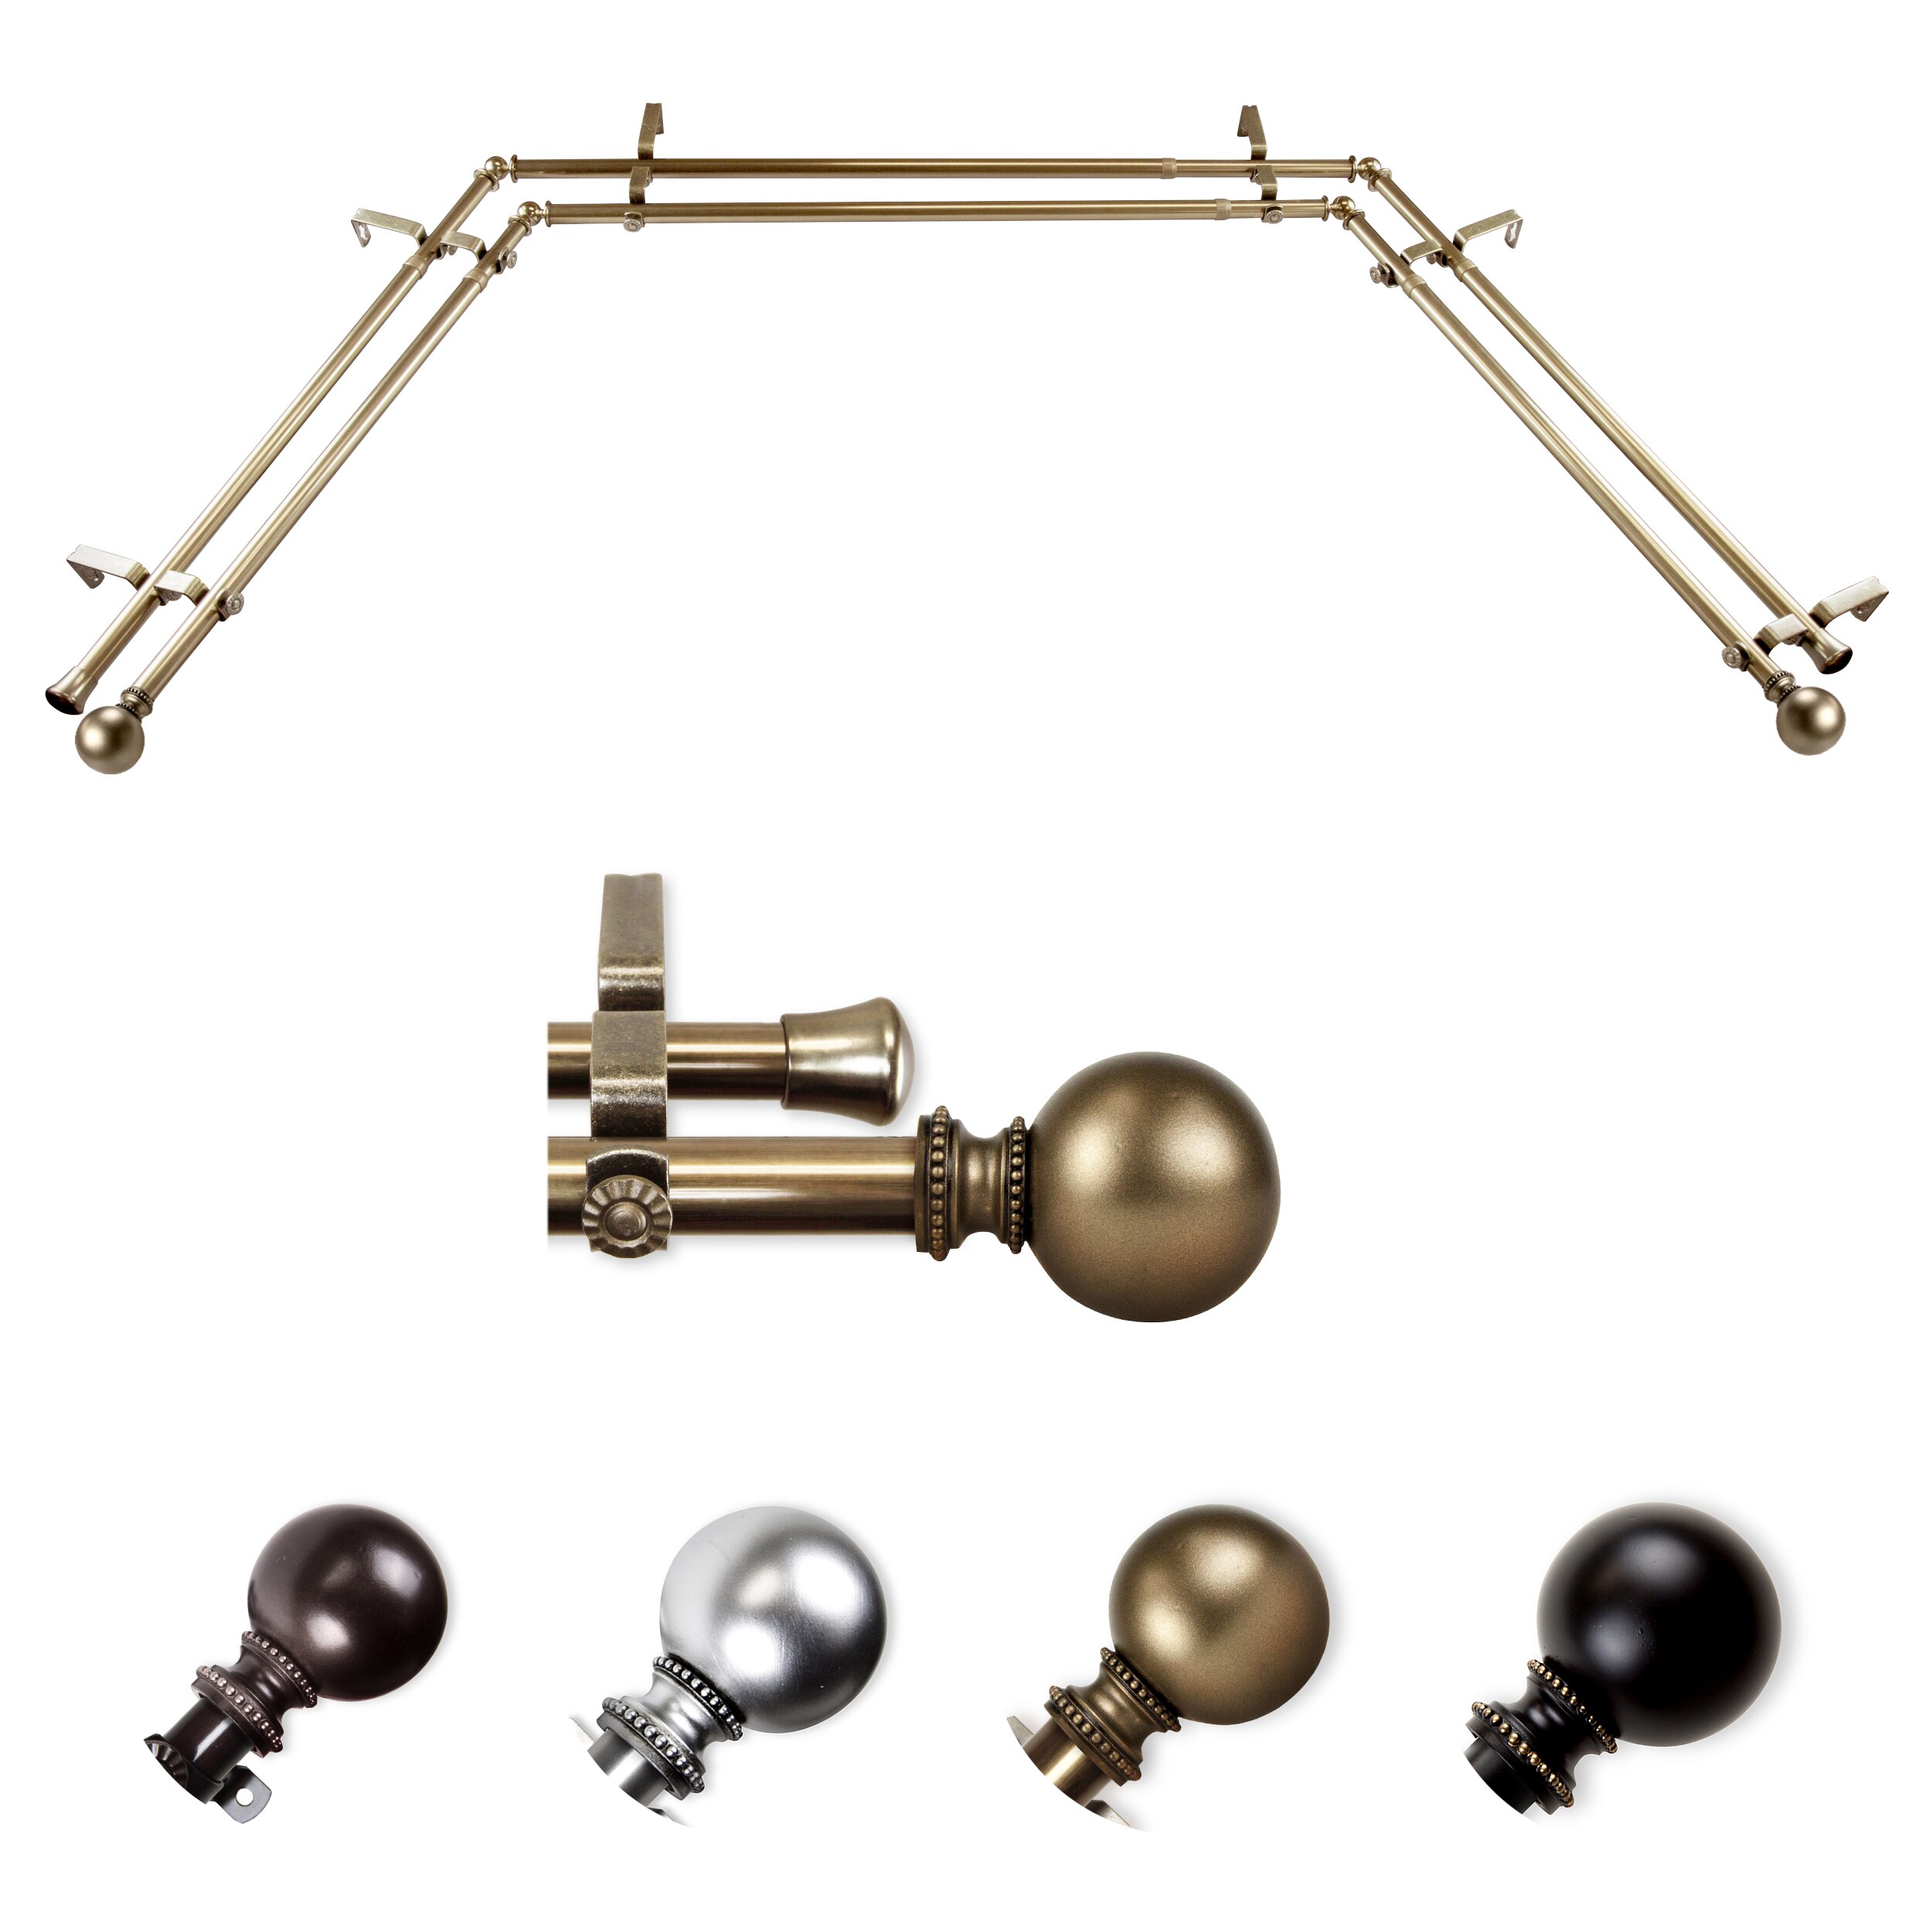 Parker 13/16-in Double Bay Curtain Rods at Lowes.com